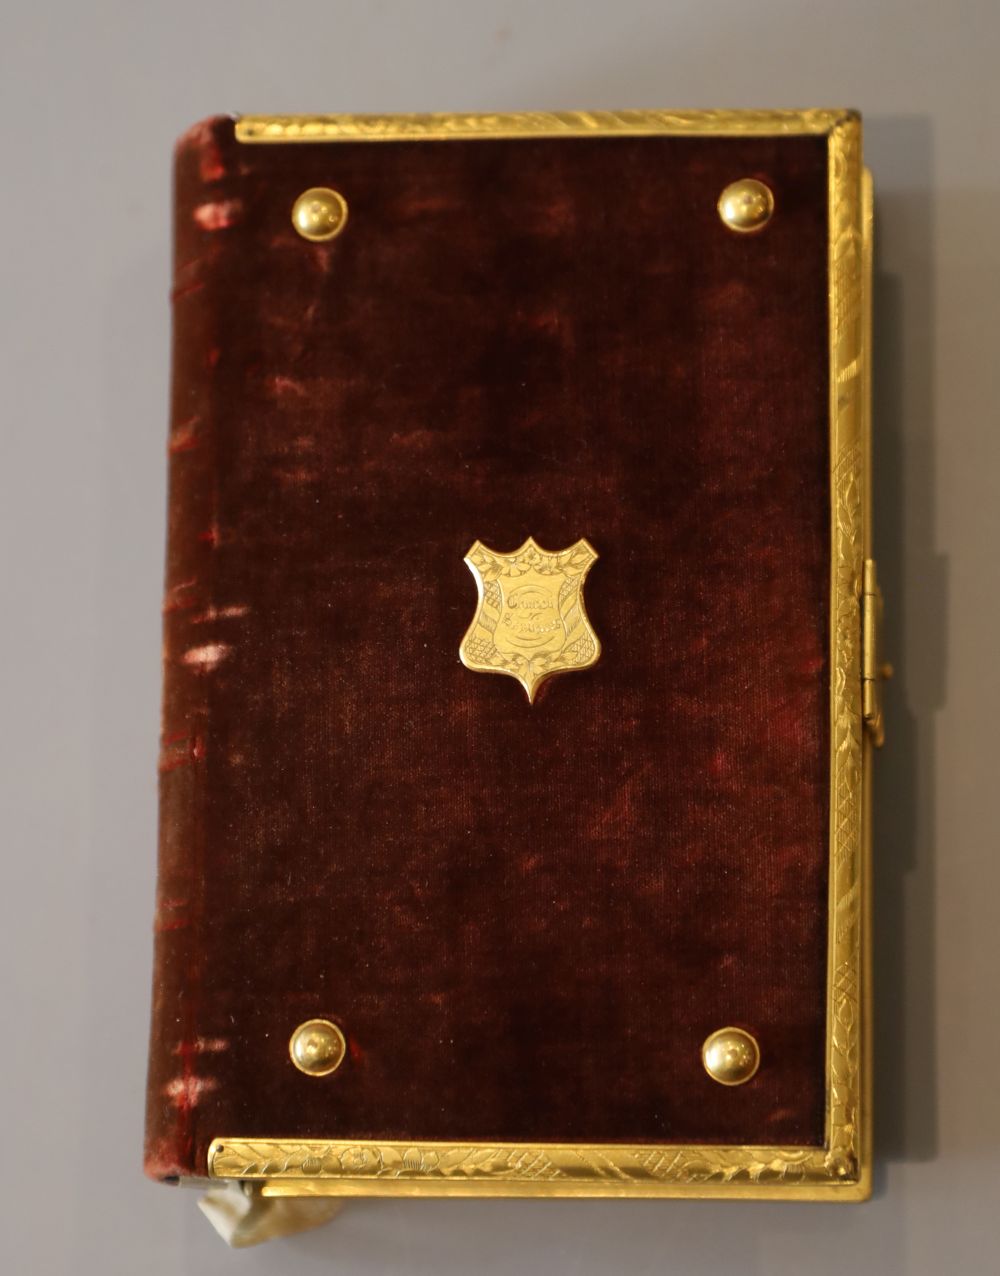 Book of Common Prayer, 12mo, contemporary red velvet, the covers with gilt brass bosses, leaf engraved borders and clasp, inner clasp i